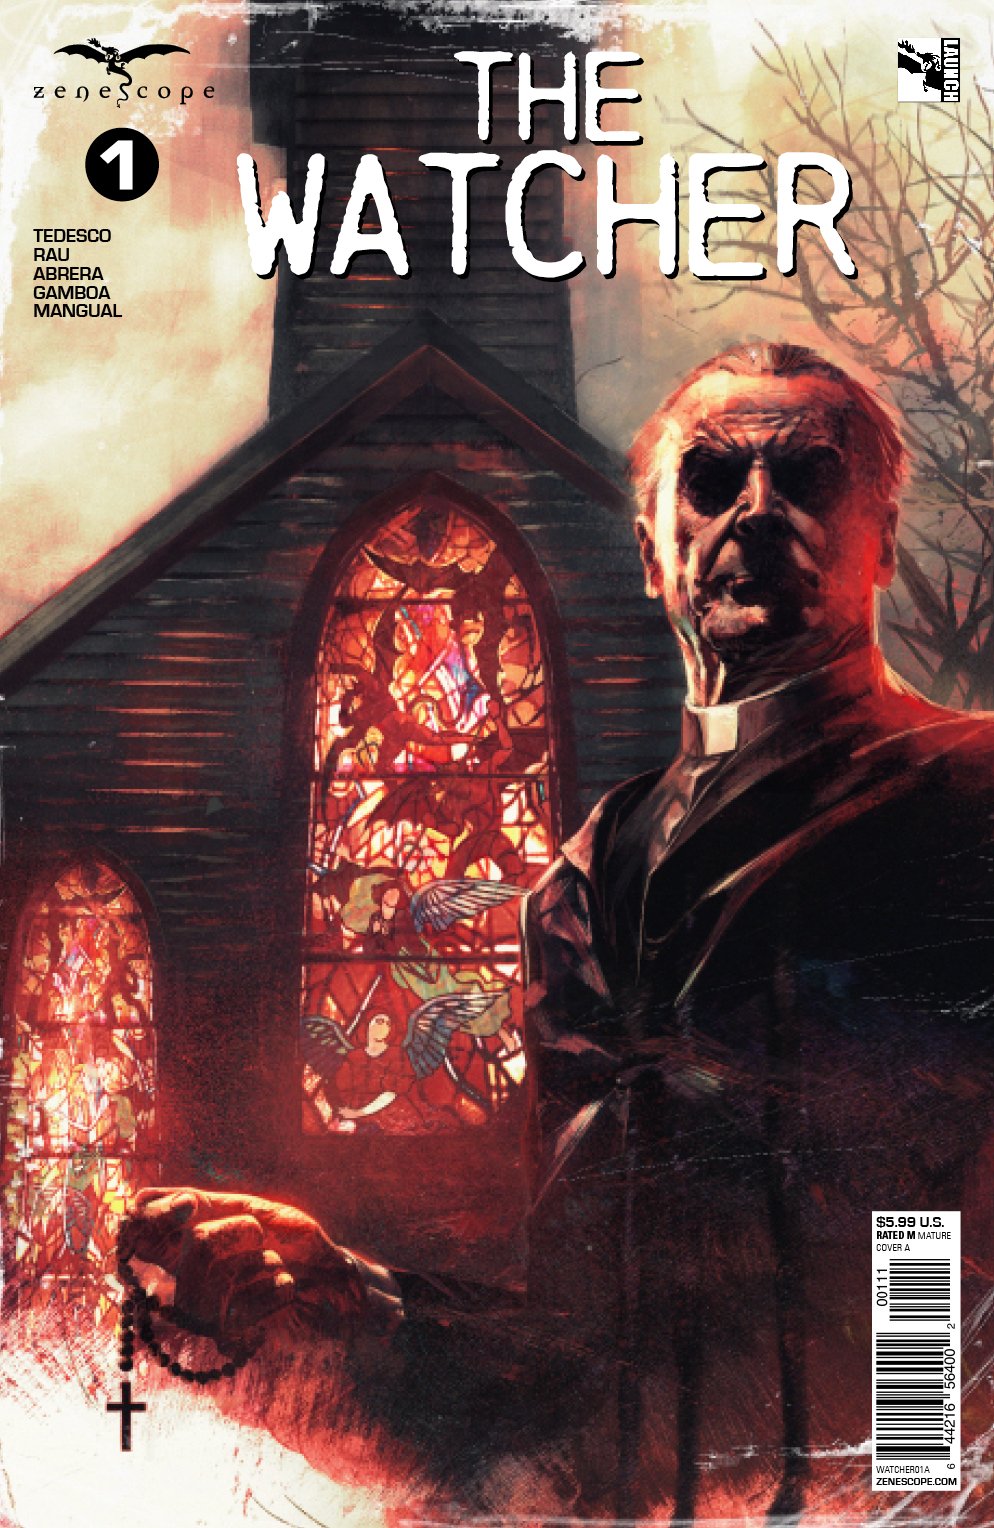 Image of The Watcher #1